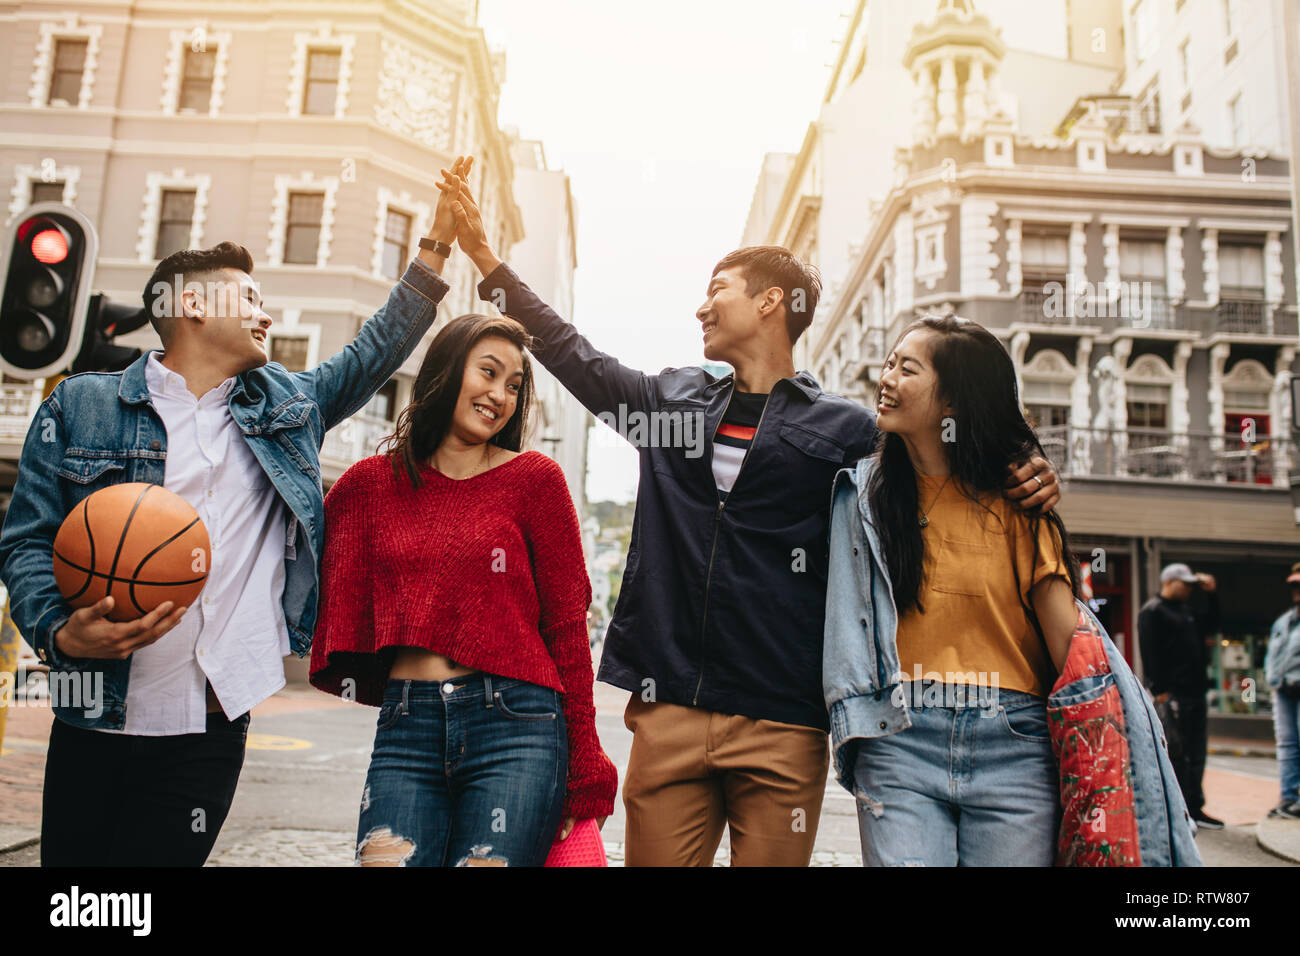 Aisan young friends having fun together on the street, men high fiving each other. Group of men and women walking outdoors. Stock Photo